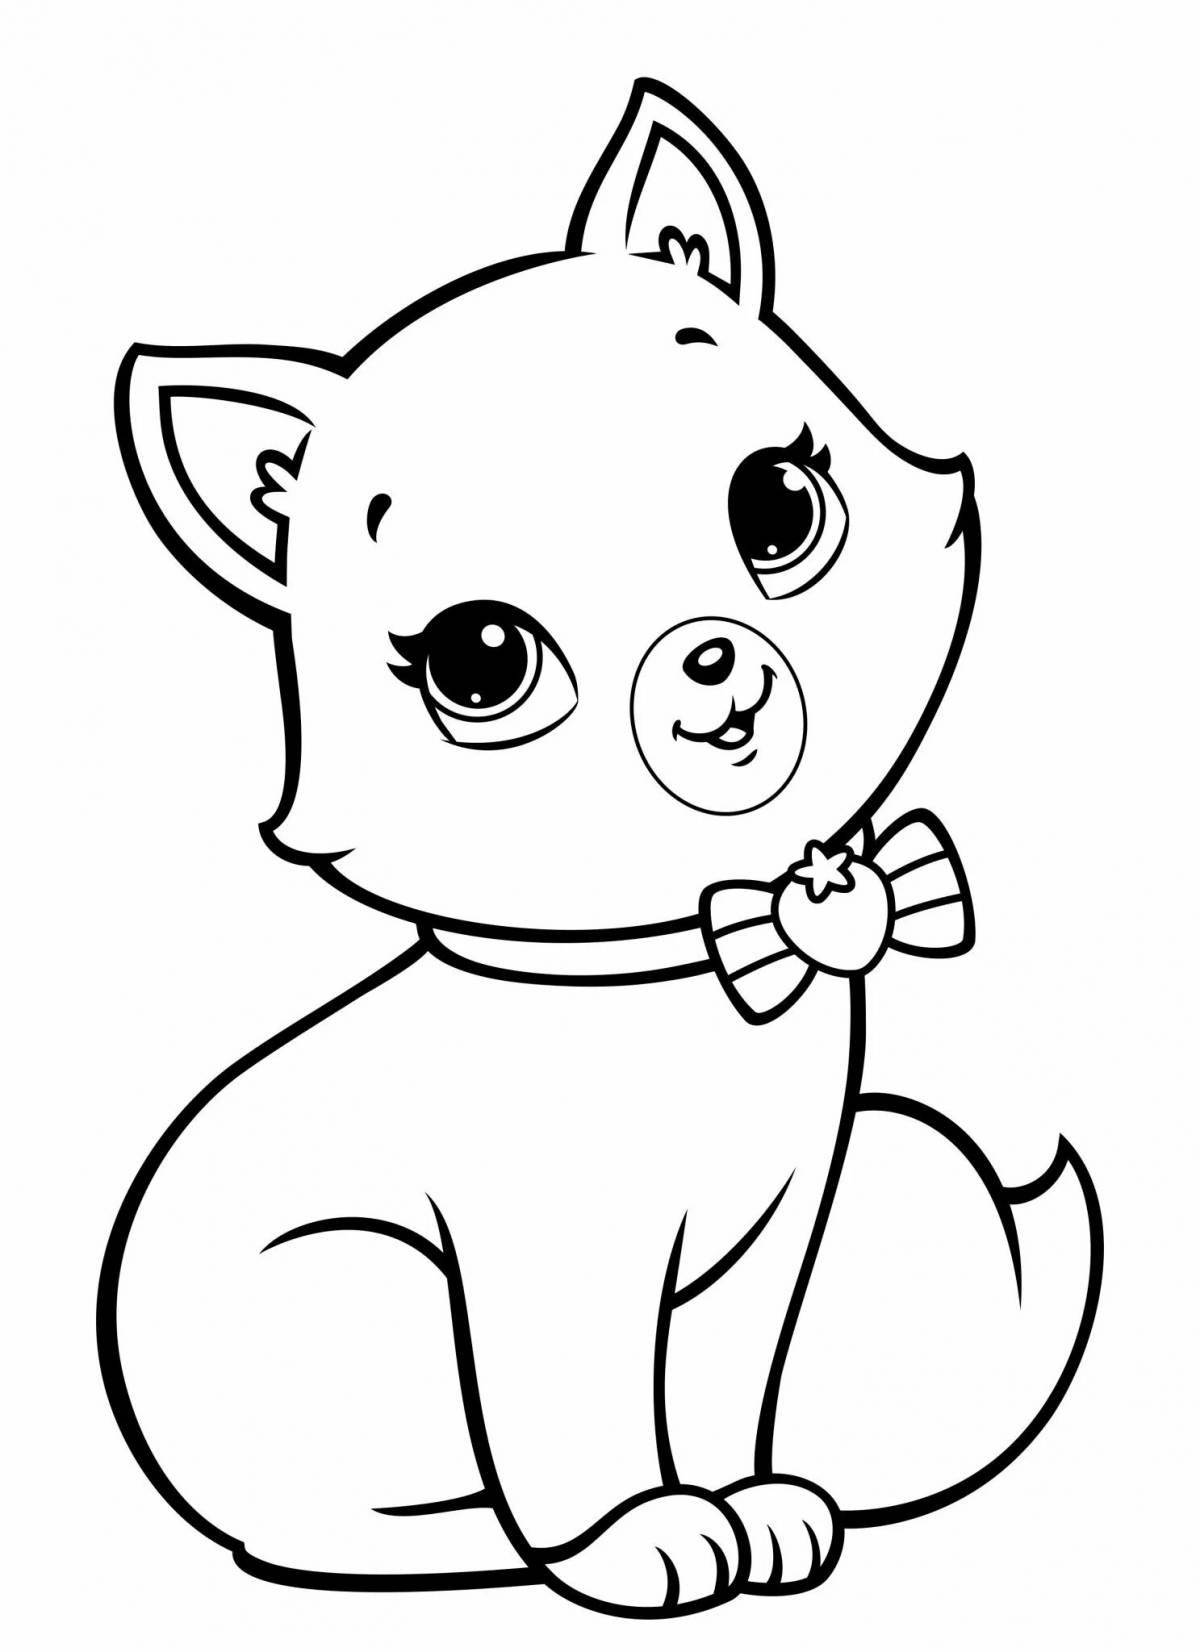 Live dog and cat coloring page